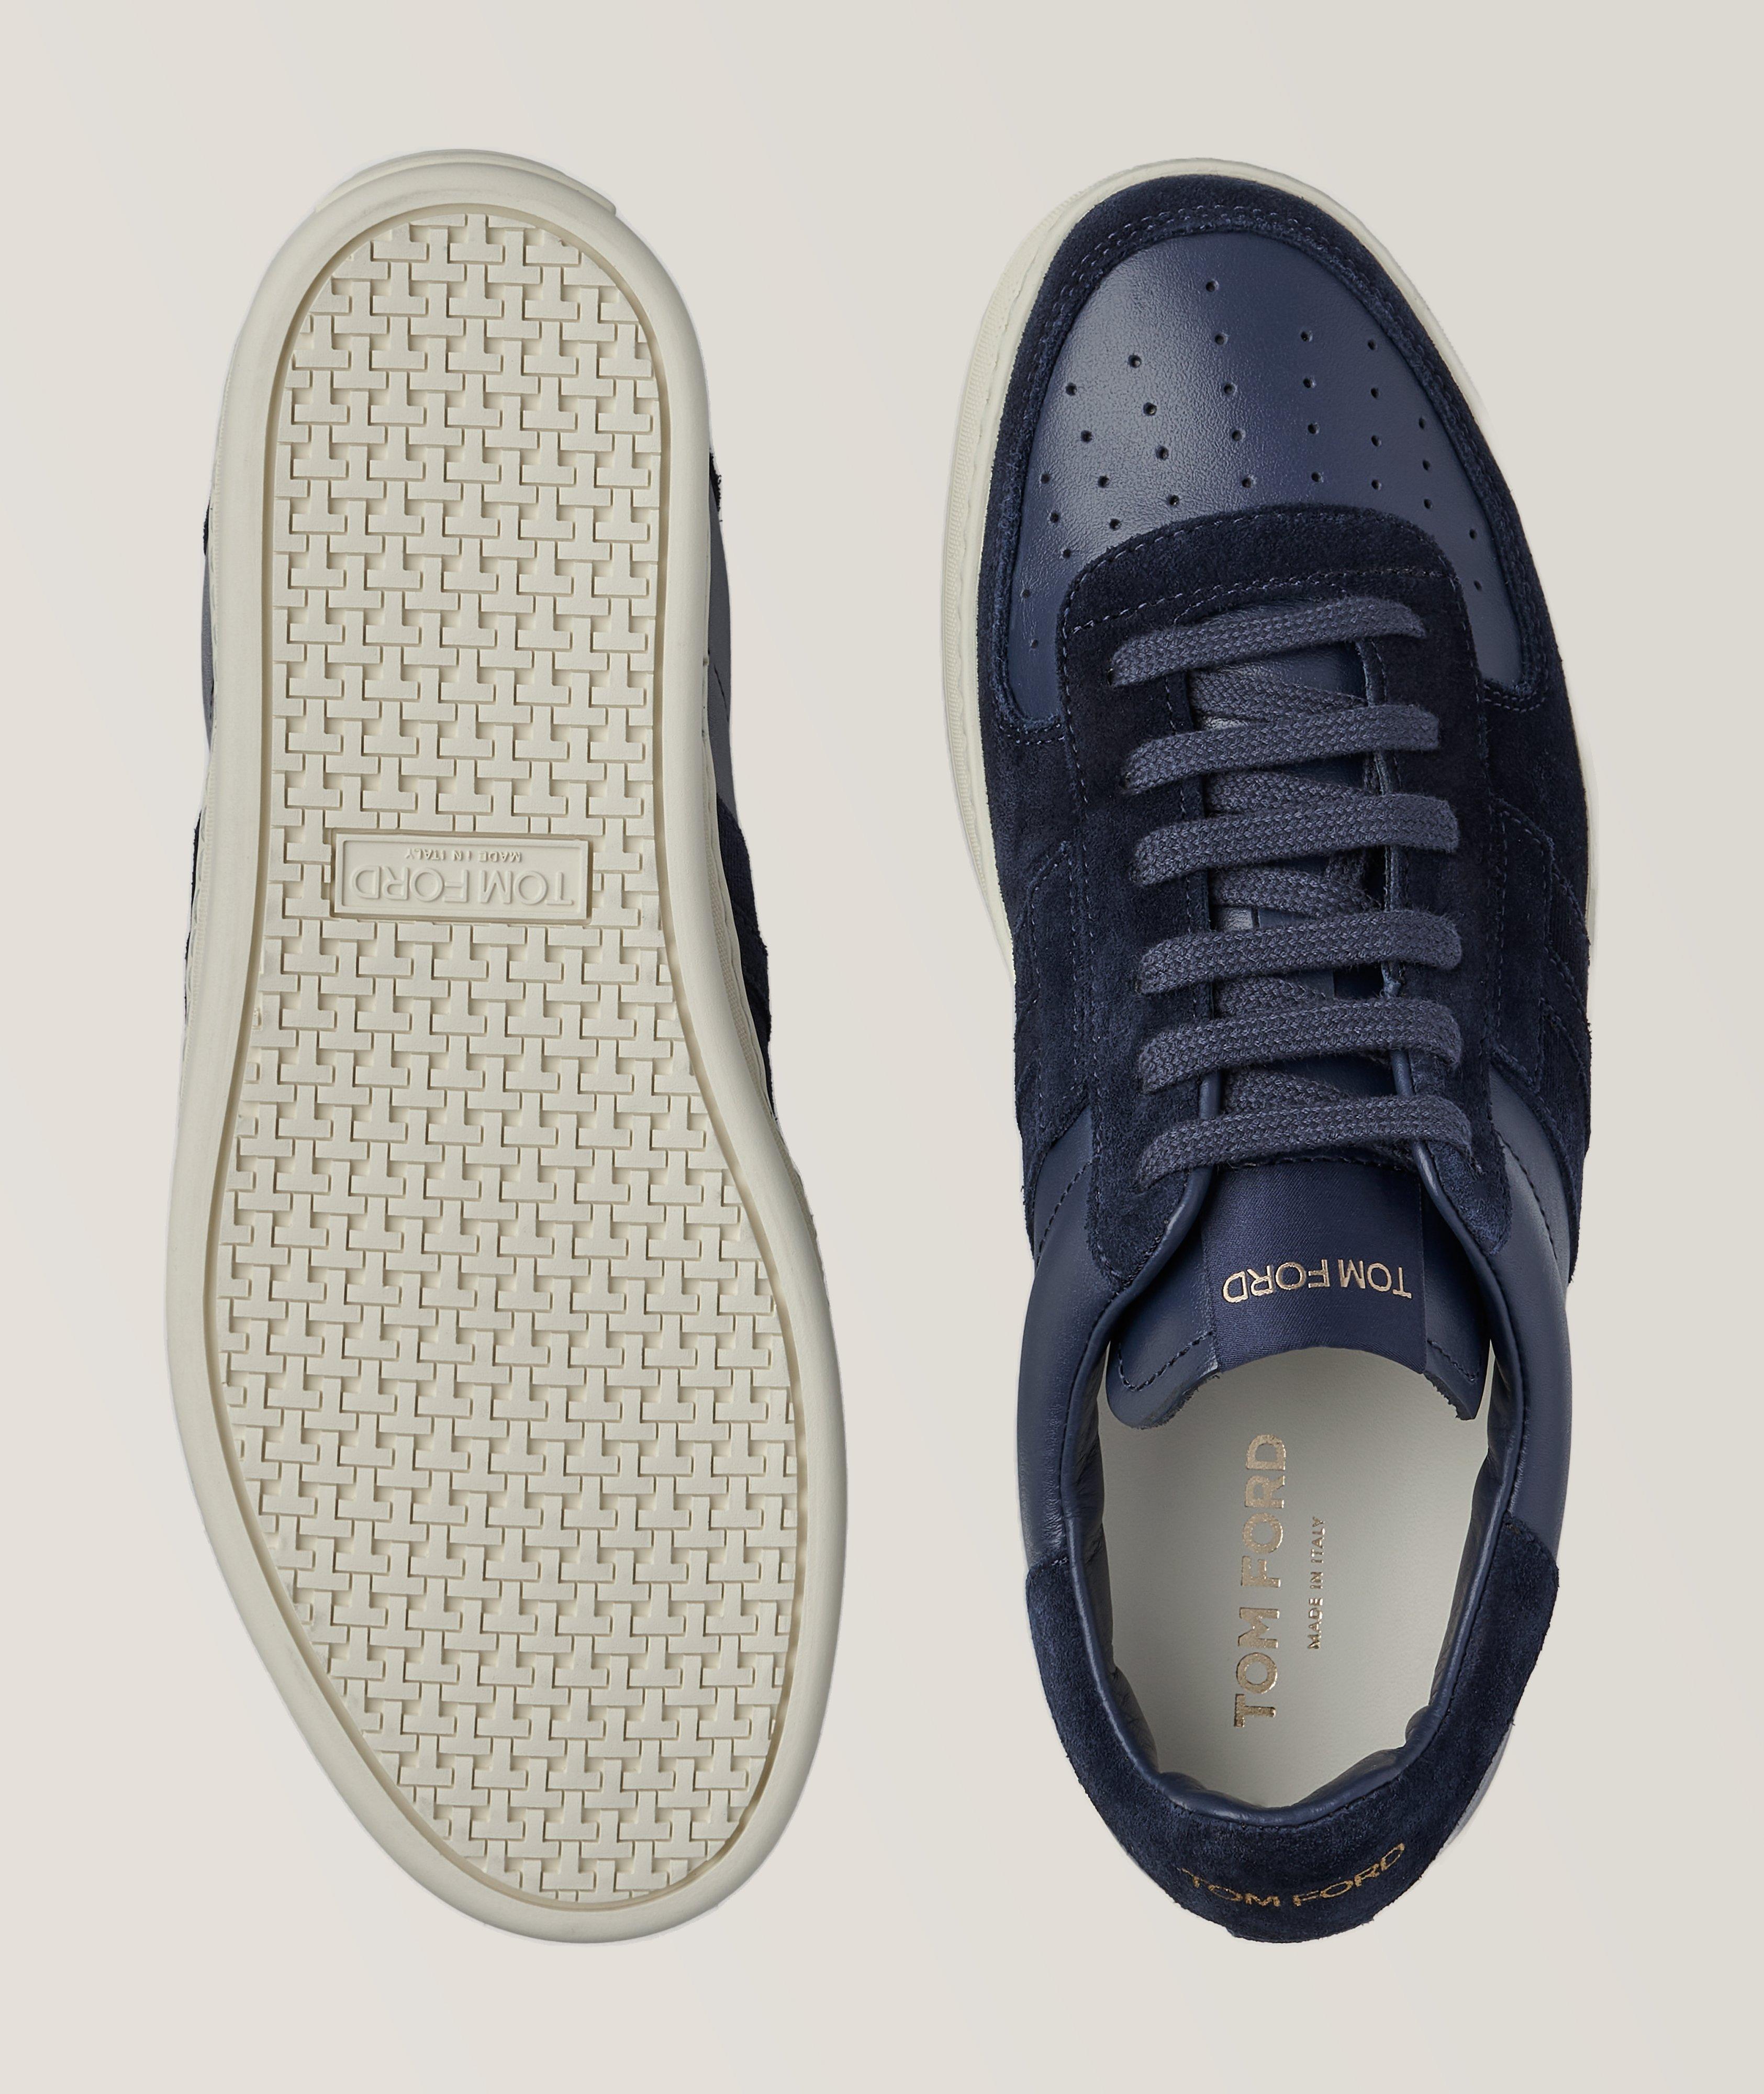 Radcliffe Tonal Suede Leather Sneakers  image 2